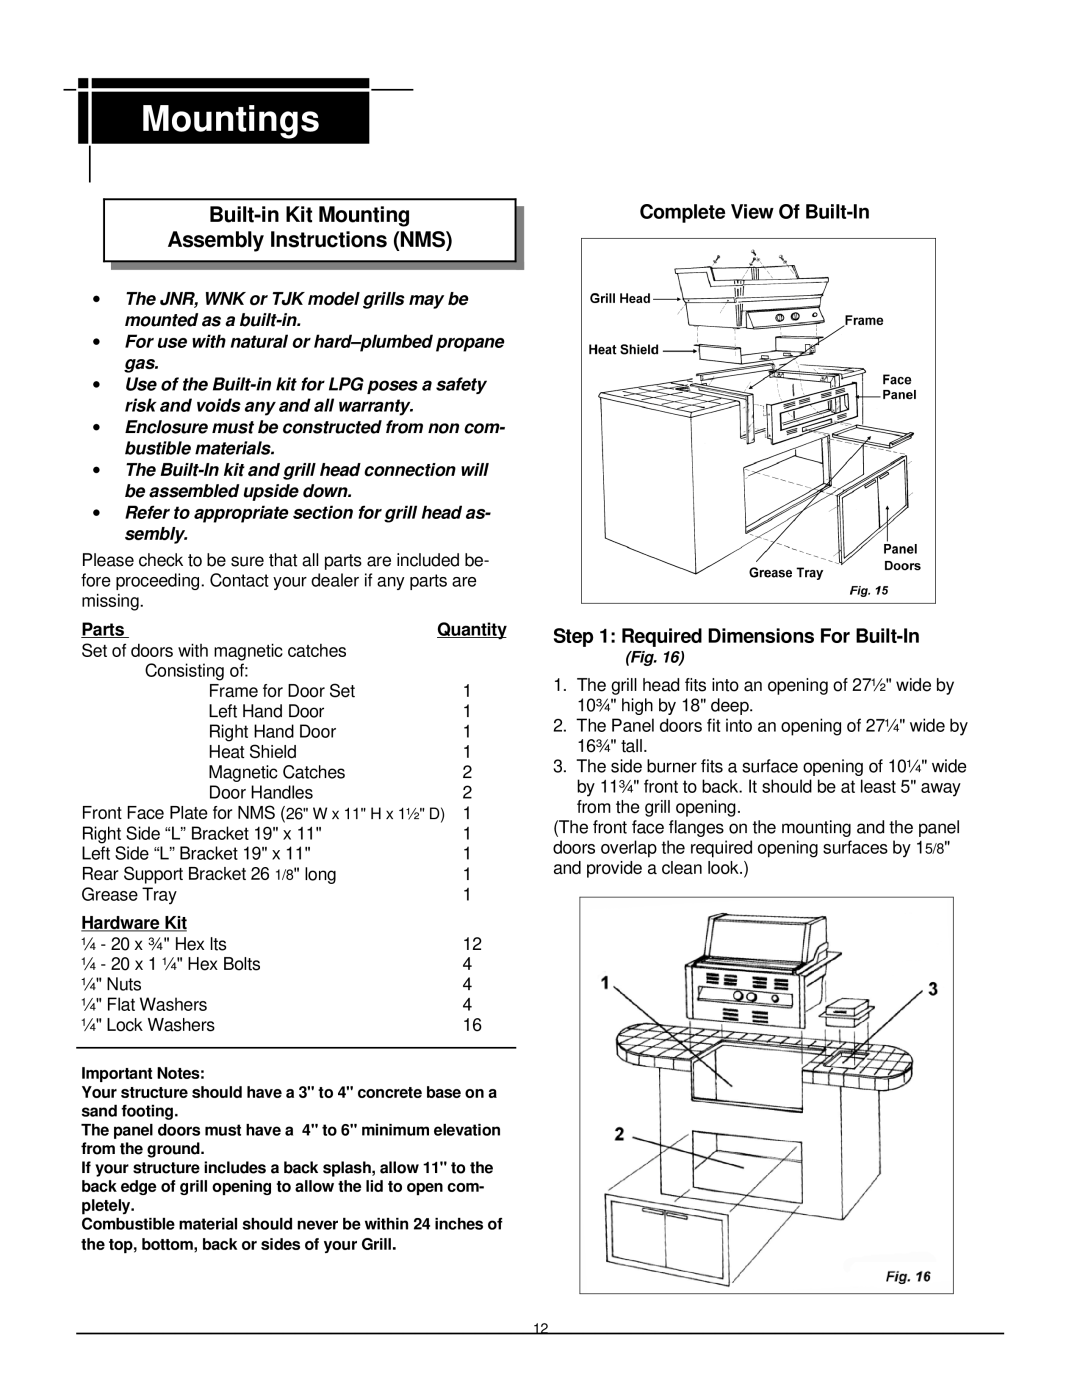 MHP WNK Built-in Kit Mounting Assembly Instructions NMS, Complete View Of Built-In Required Dimensions For Built-In, Parts 